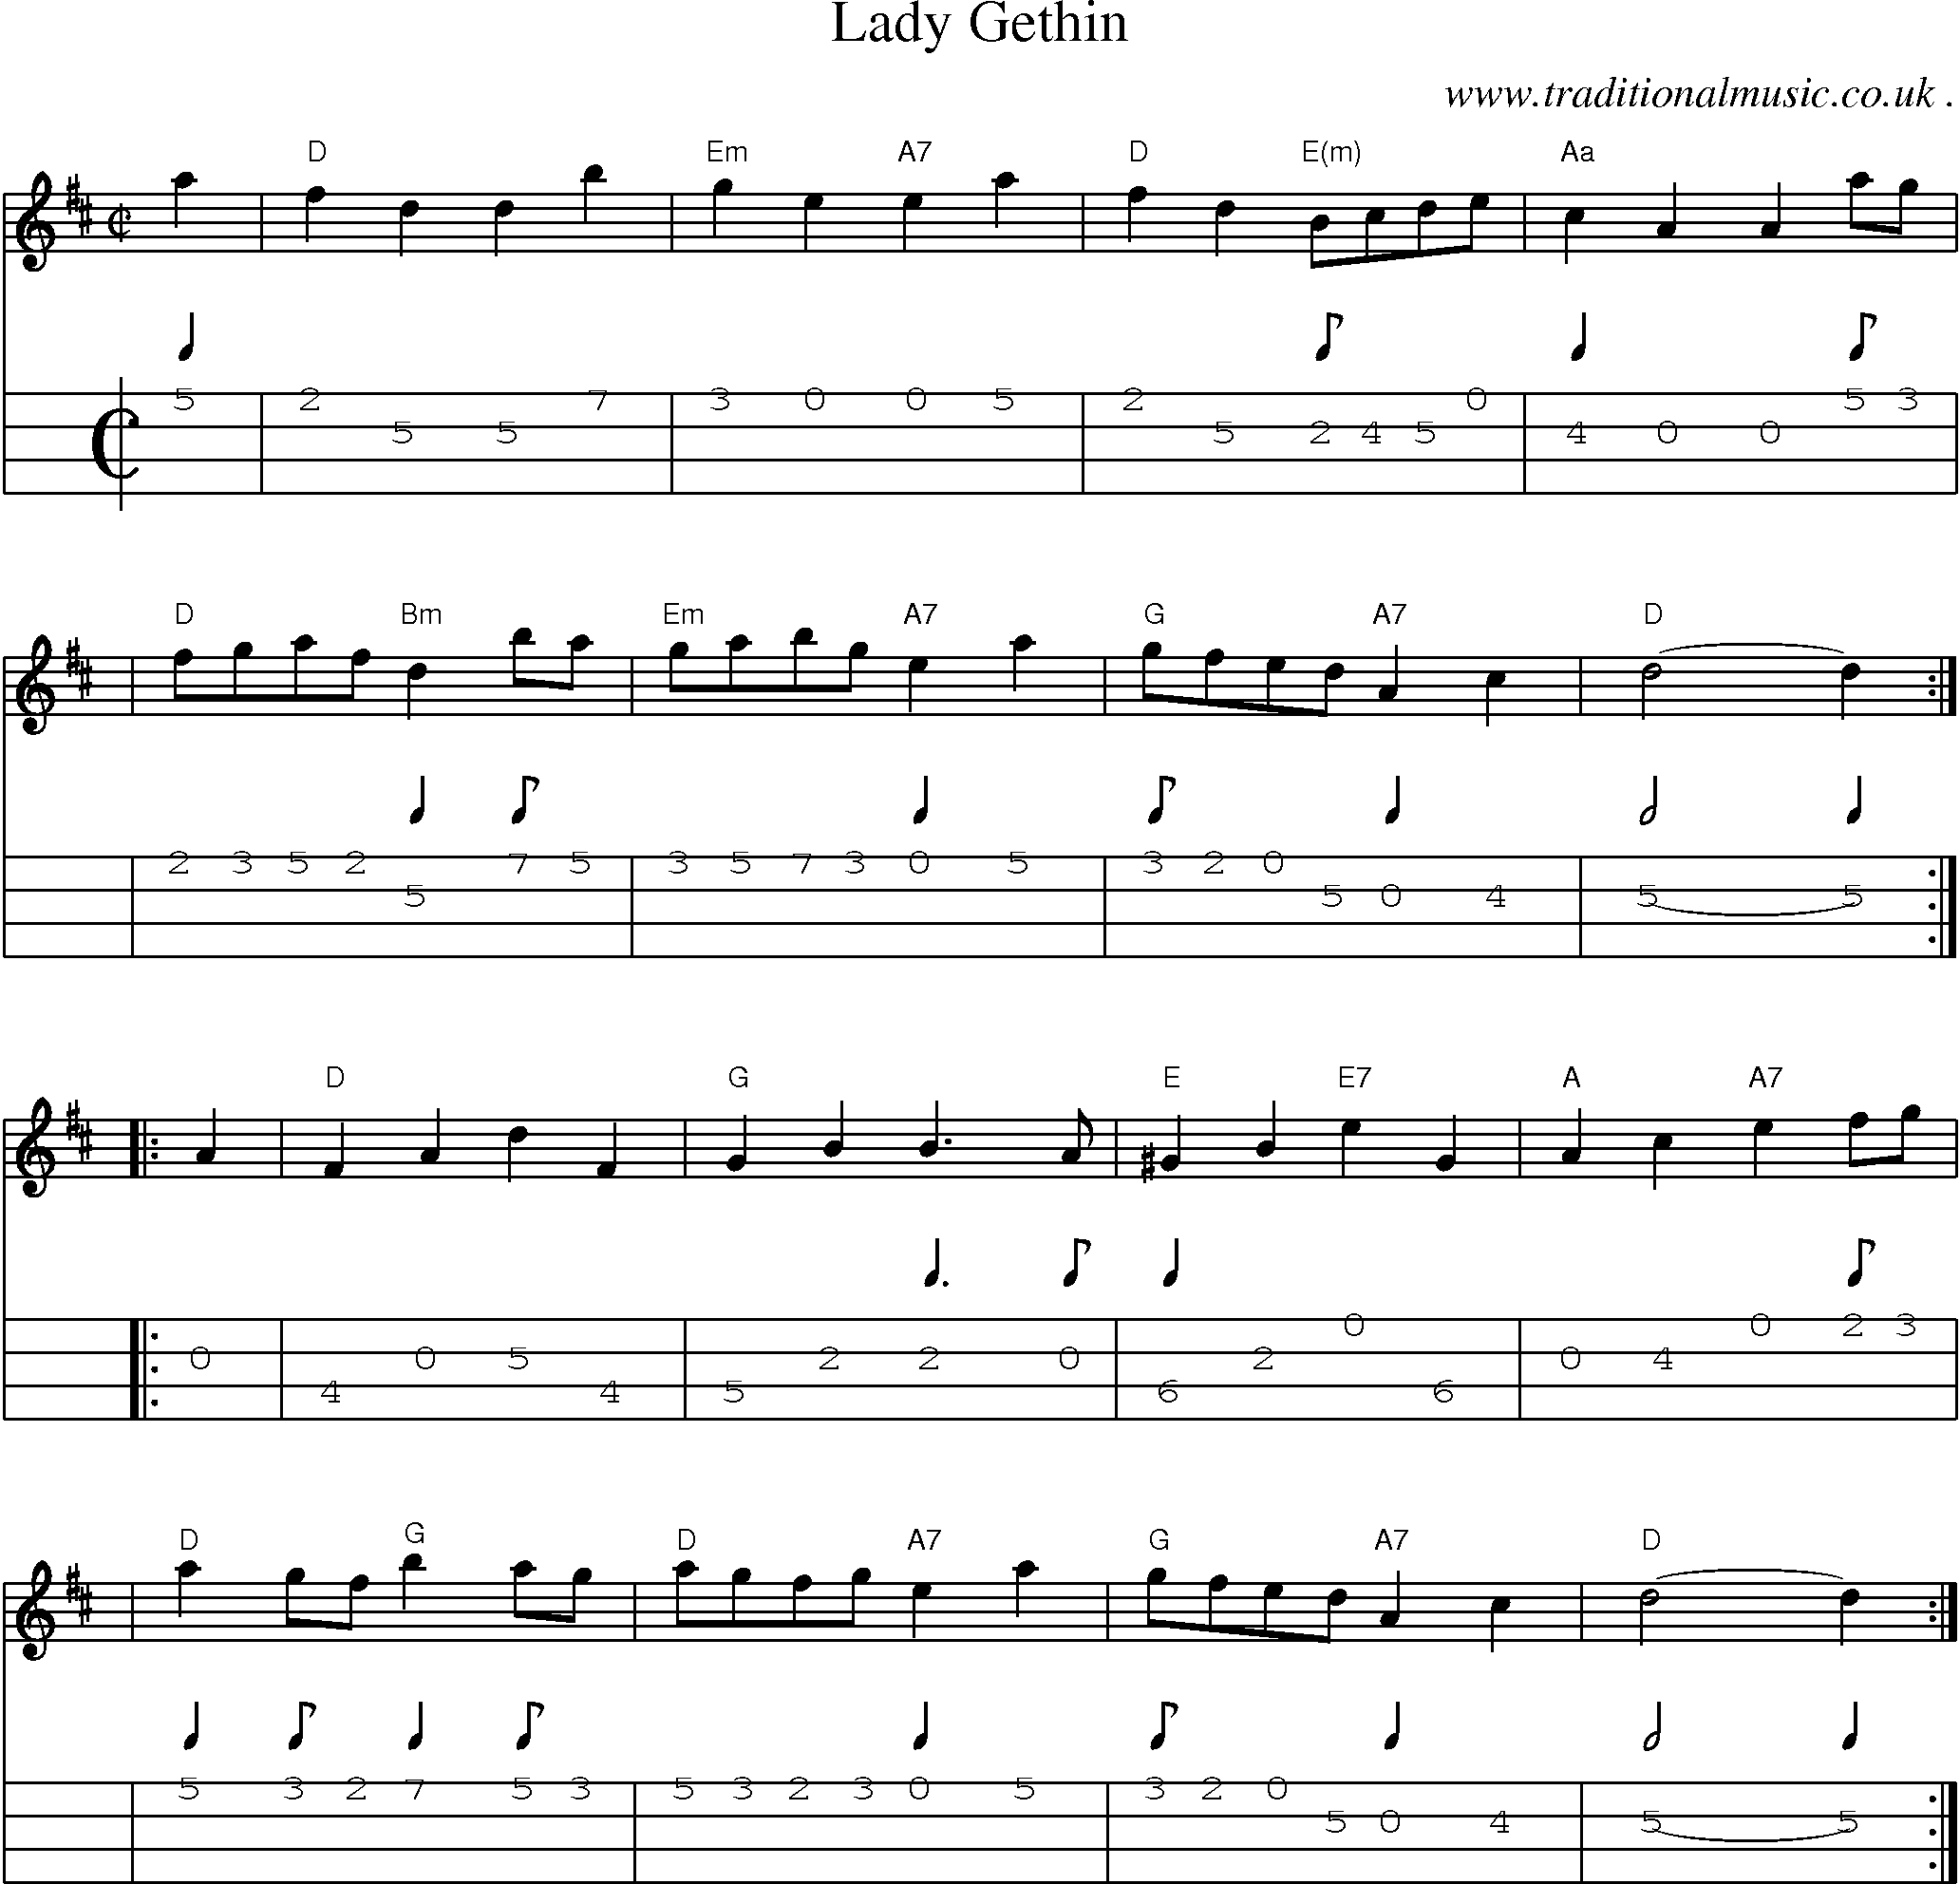 Sheet-music  score, Chords and Mandolin Tabs for Lady Gethin